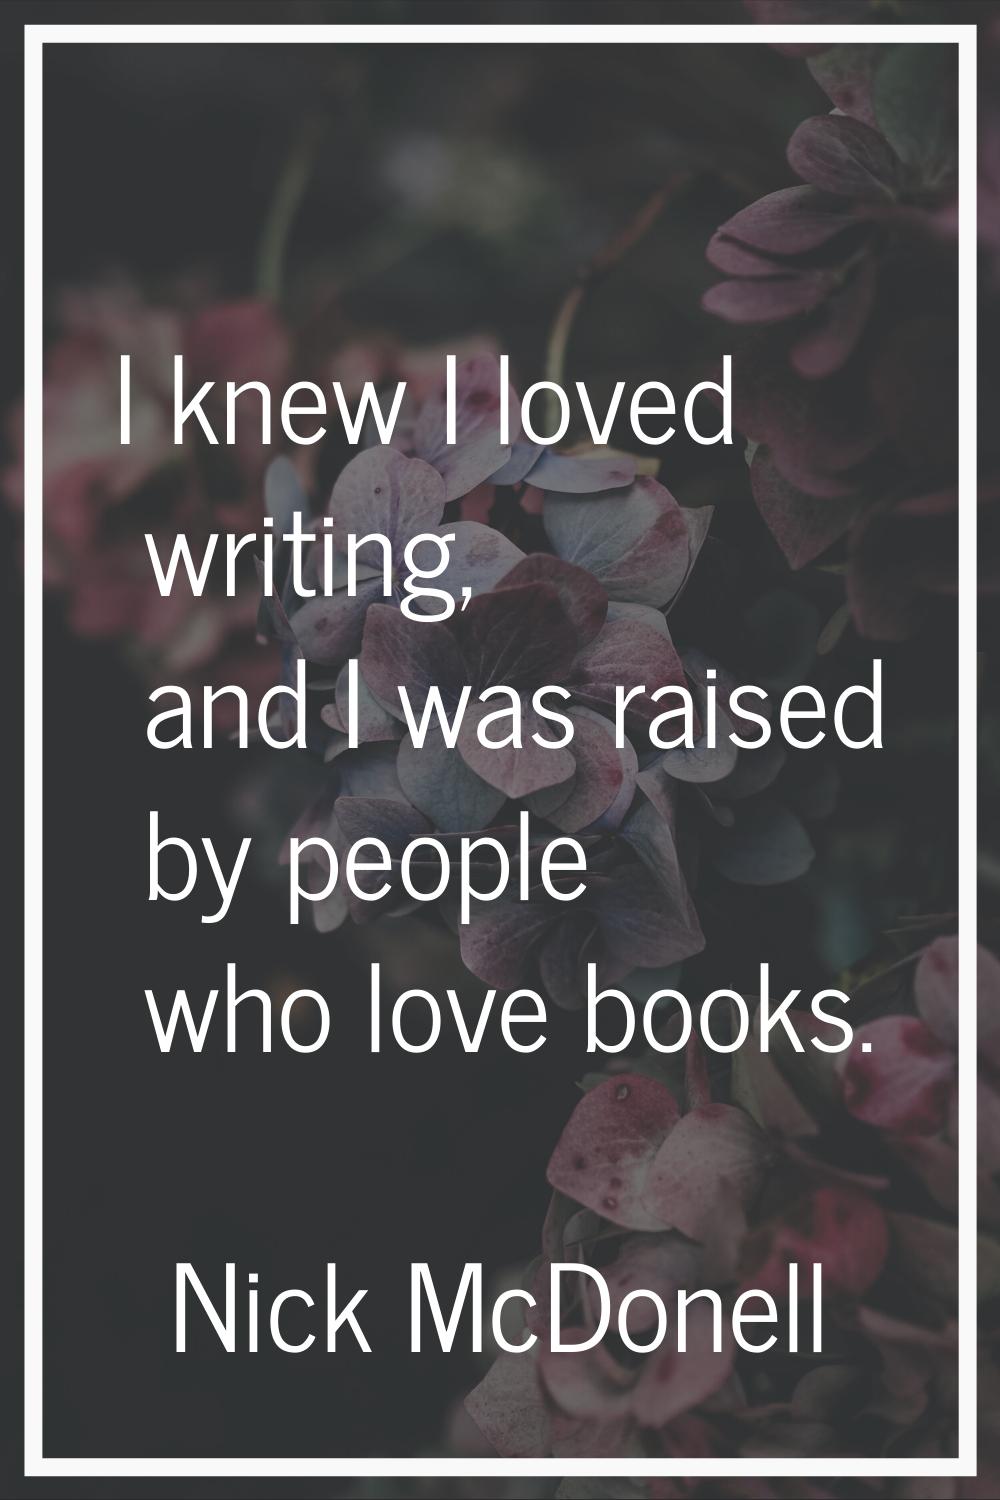 I knew I loved writing, and I was raised by people who love books.